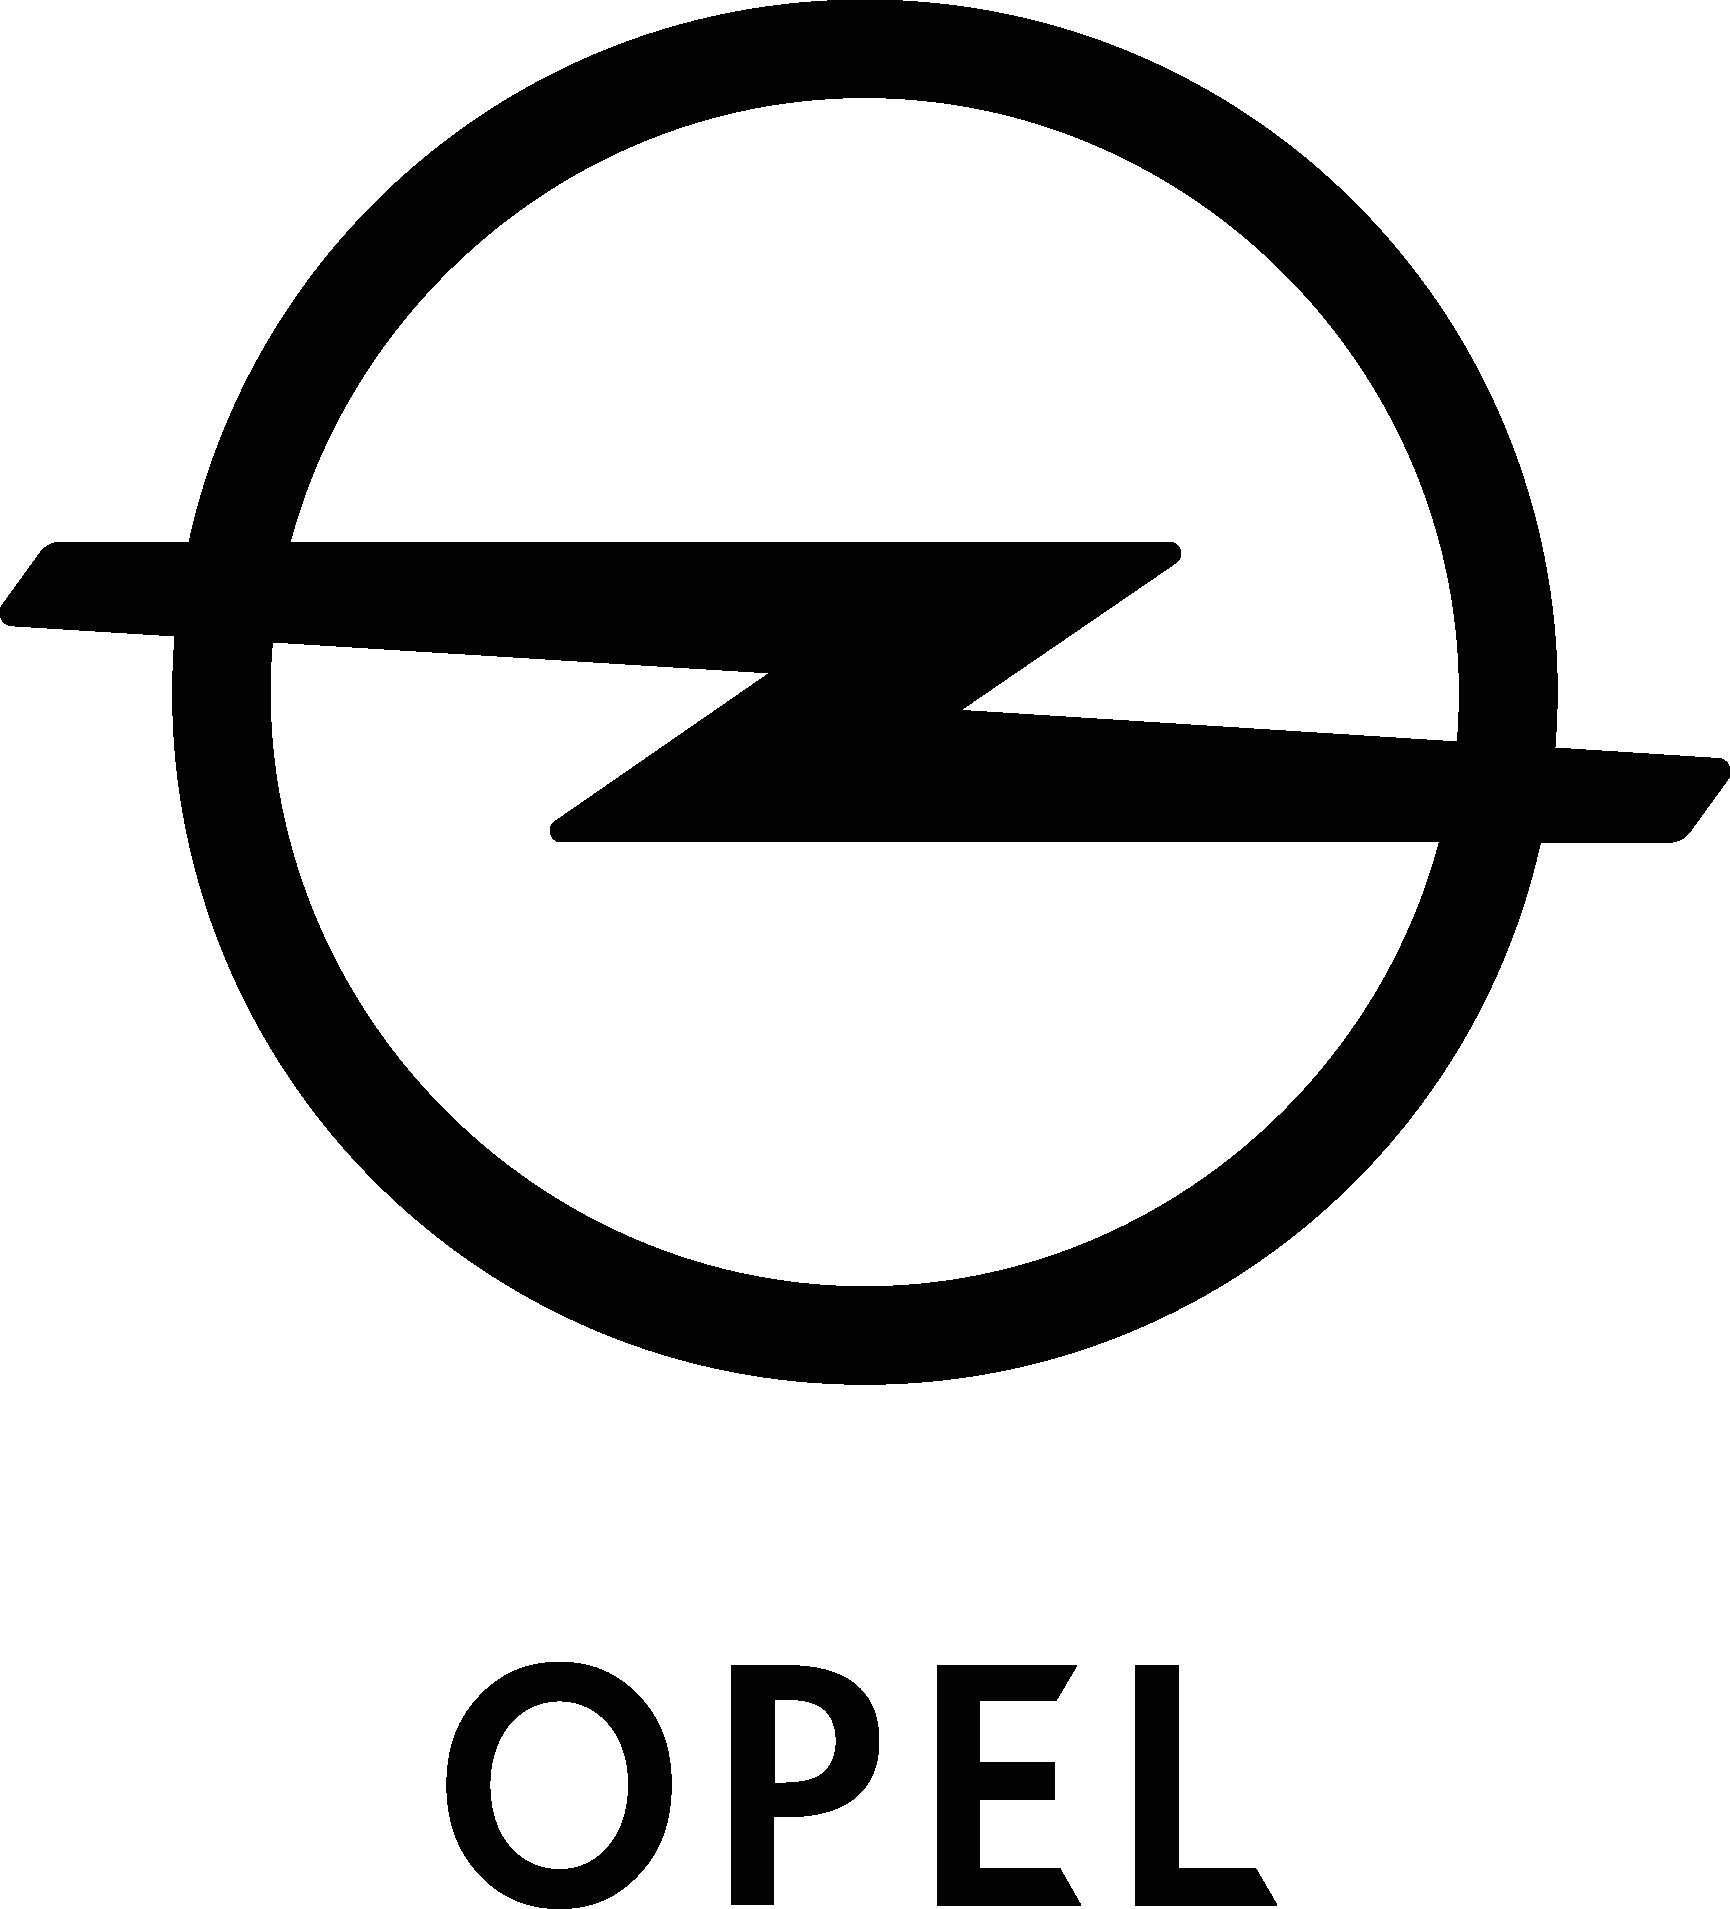 Opel Logo Download Vector - Opel, Transparent background PNG HD thumbnail